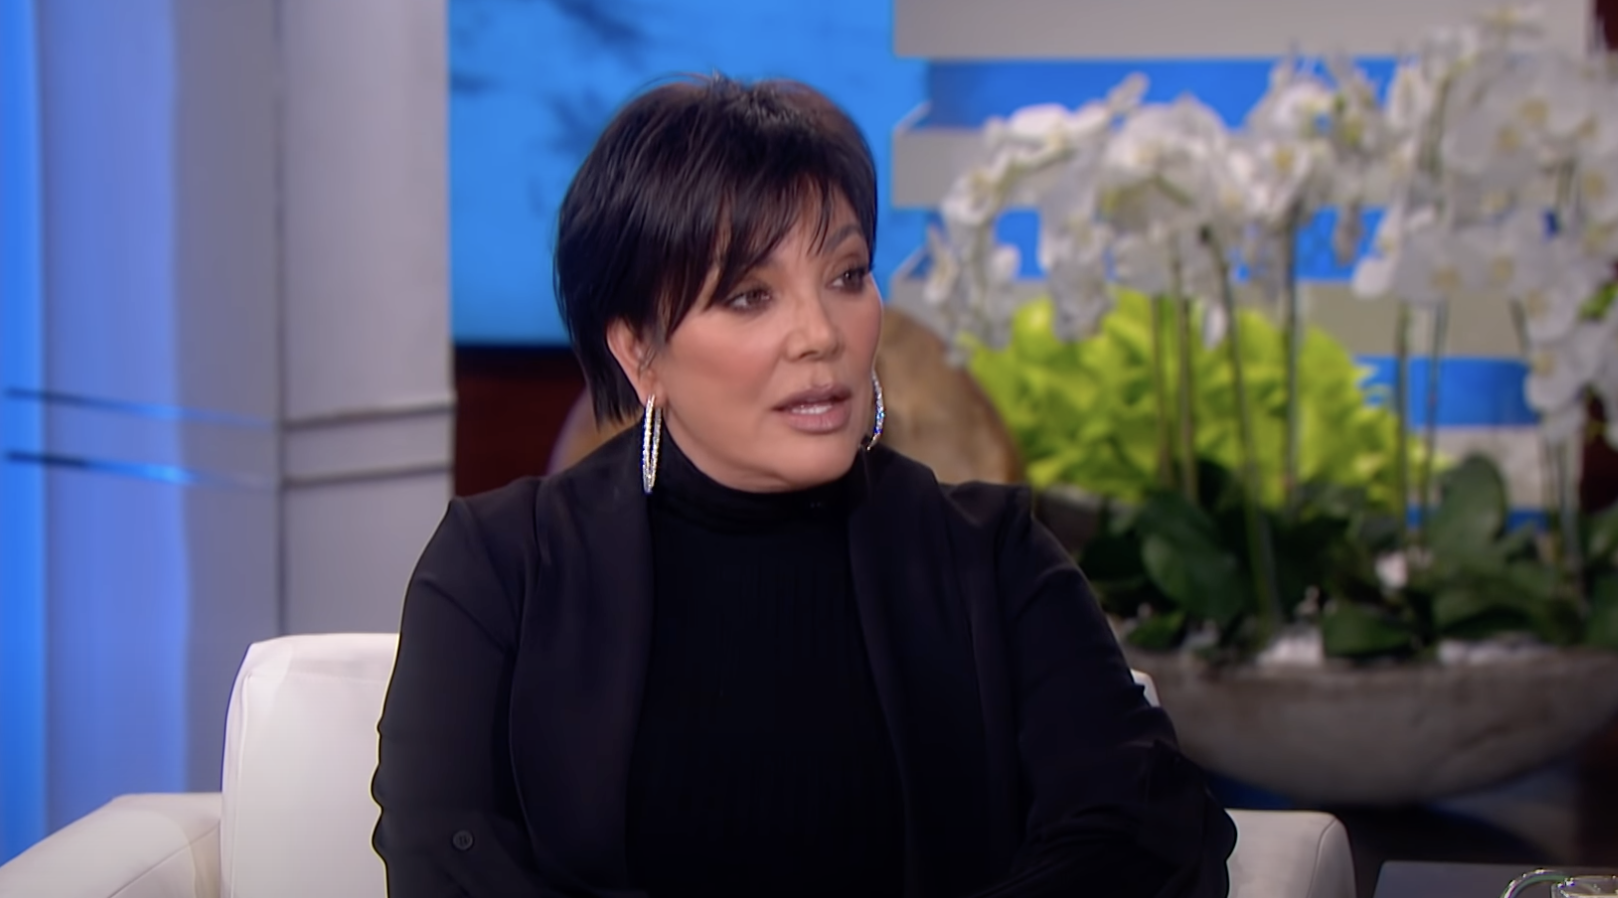 Kris Jenner on the couch at the Ellen Show